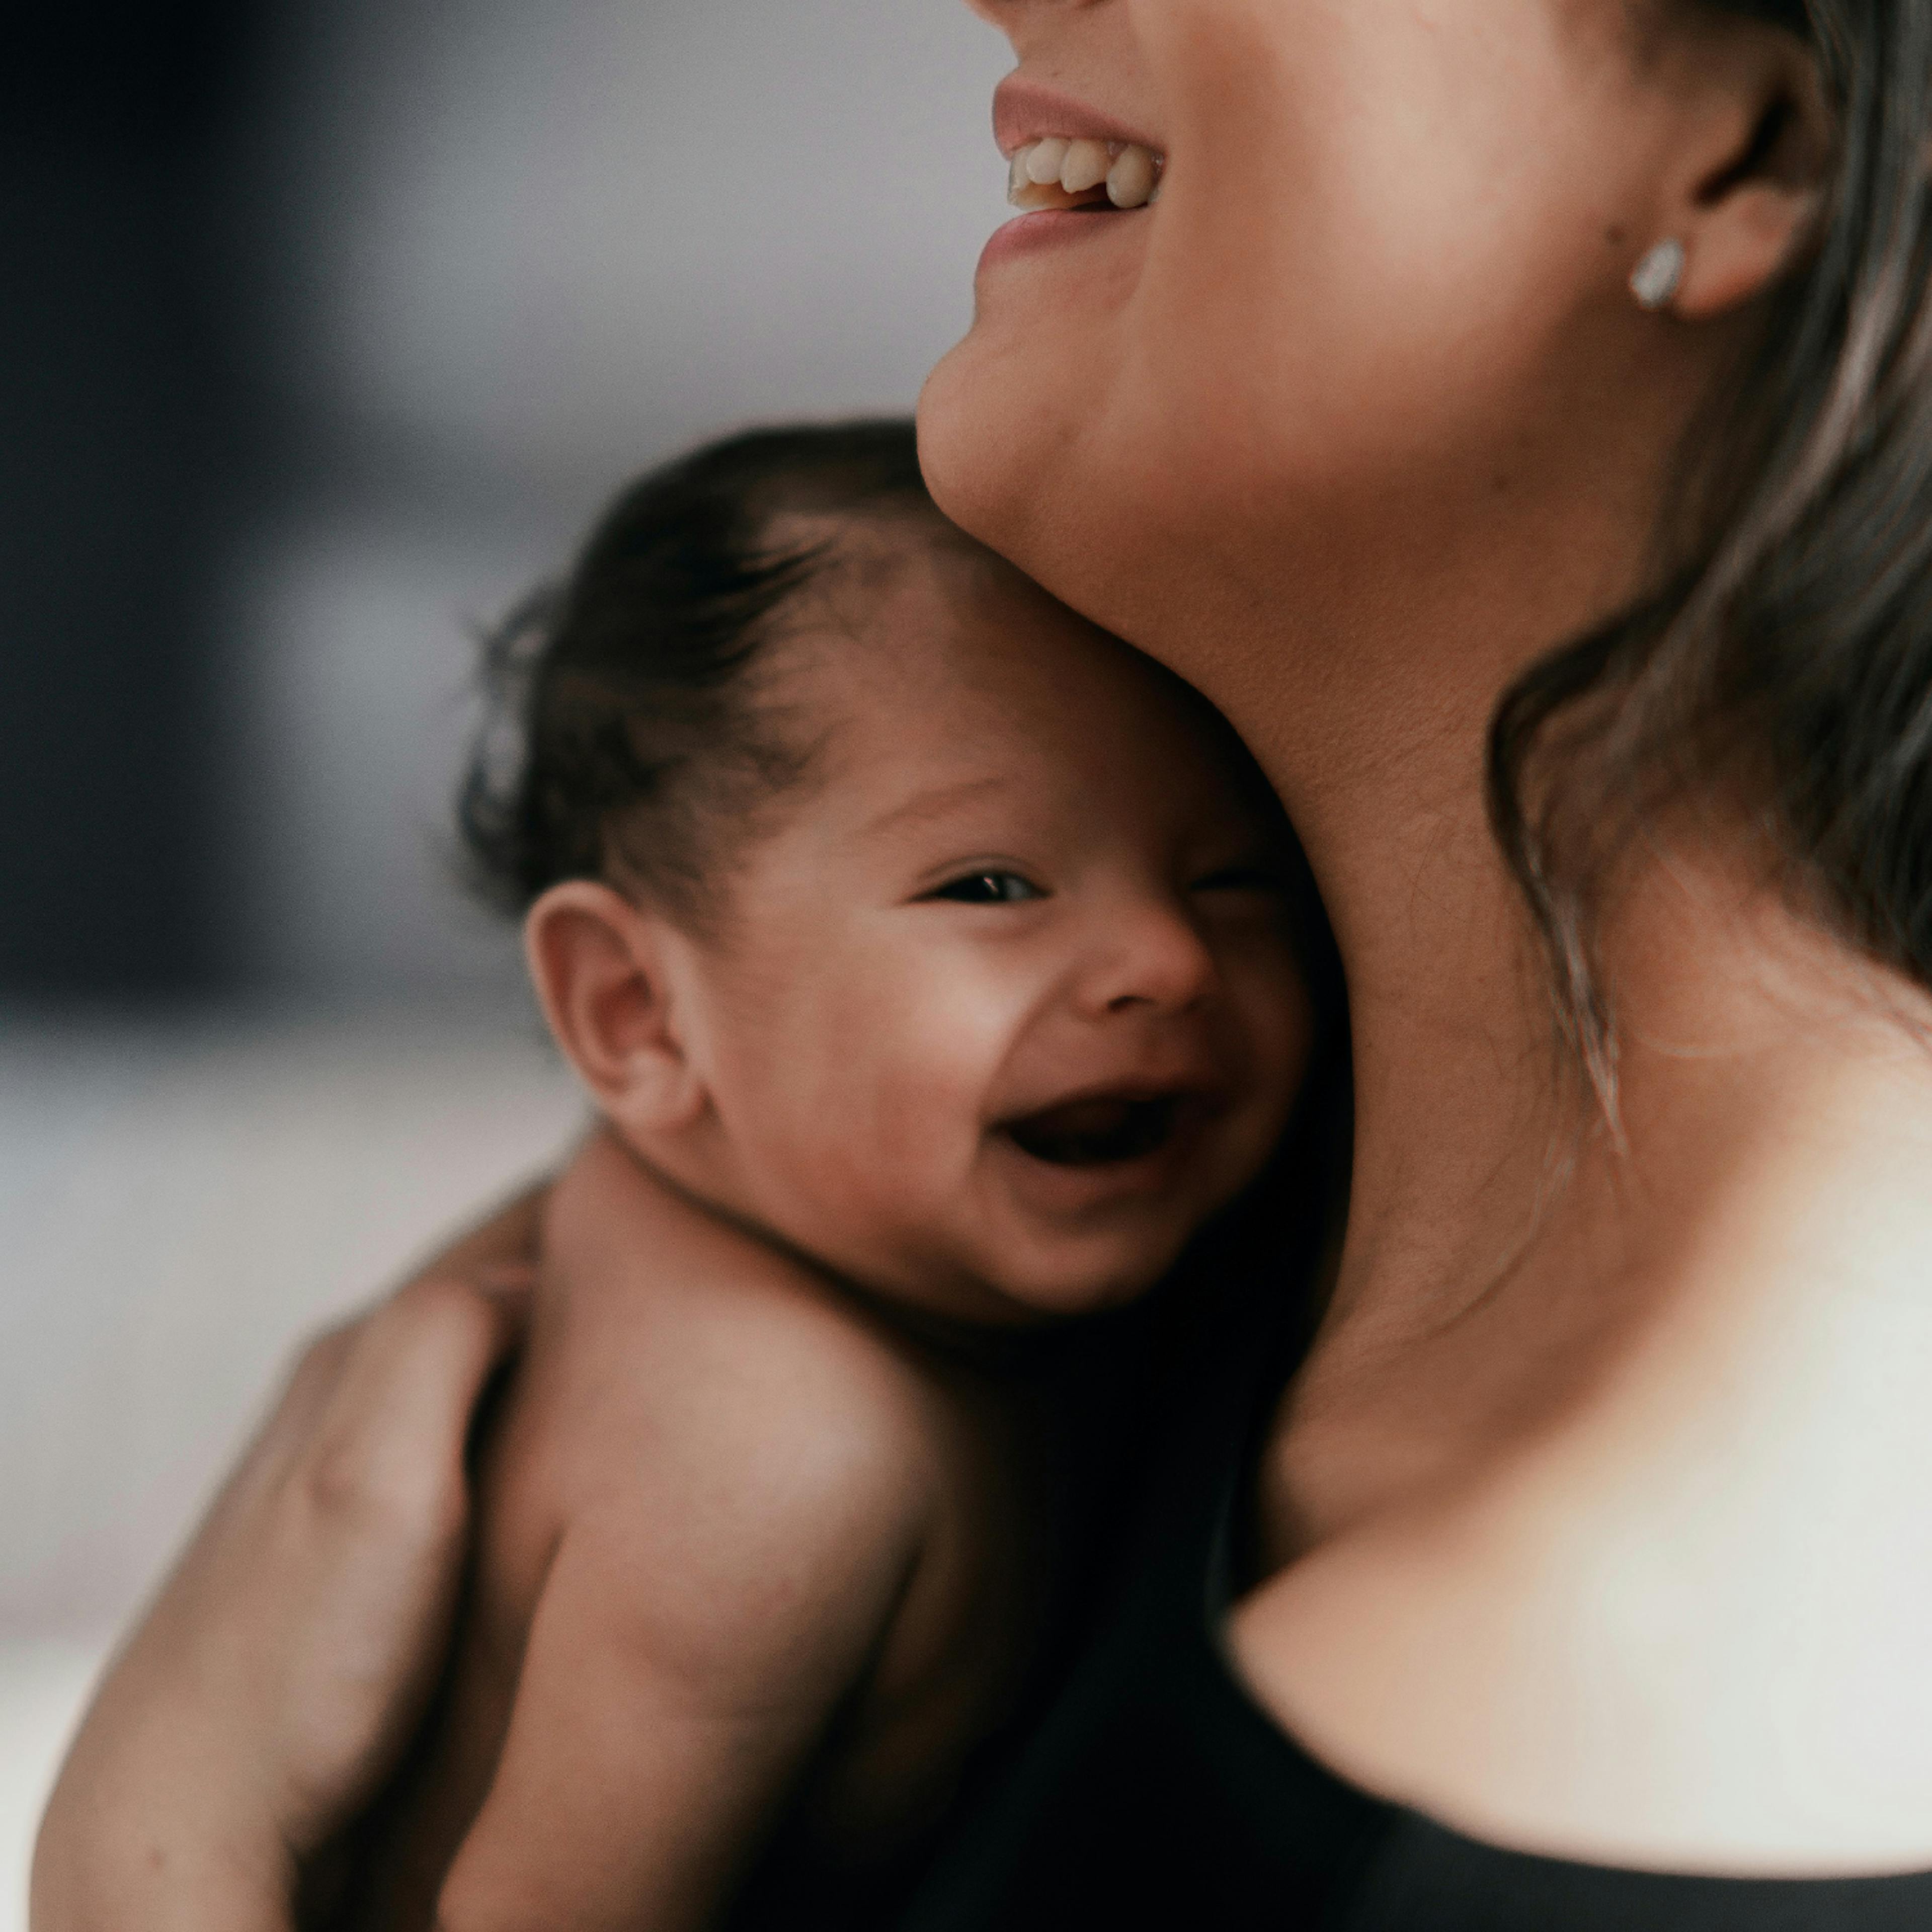 Woman and her baby laughing